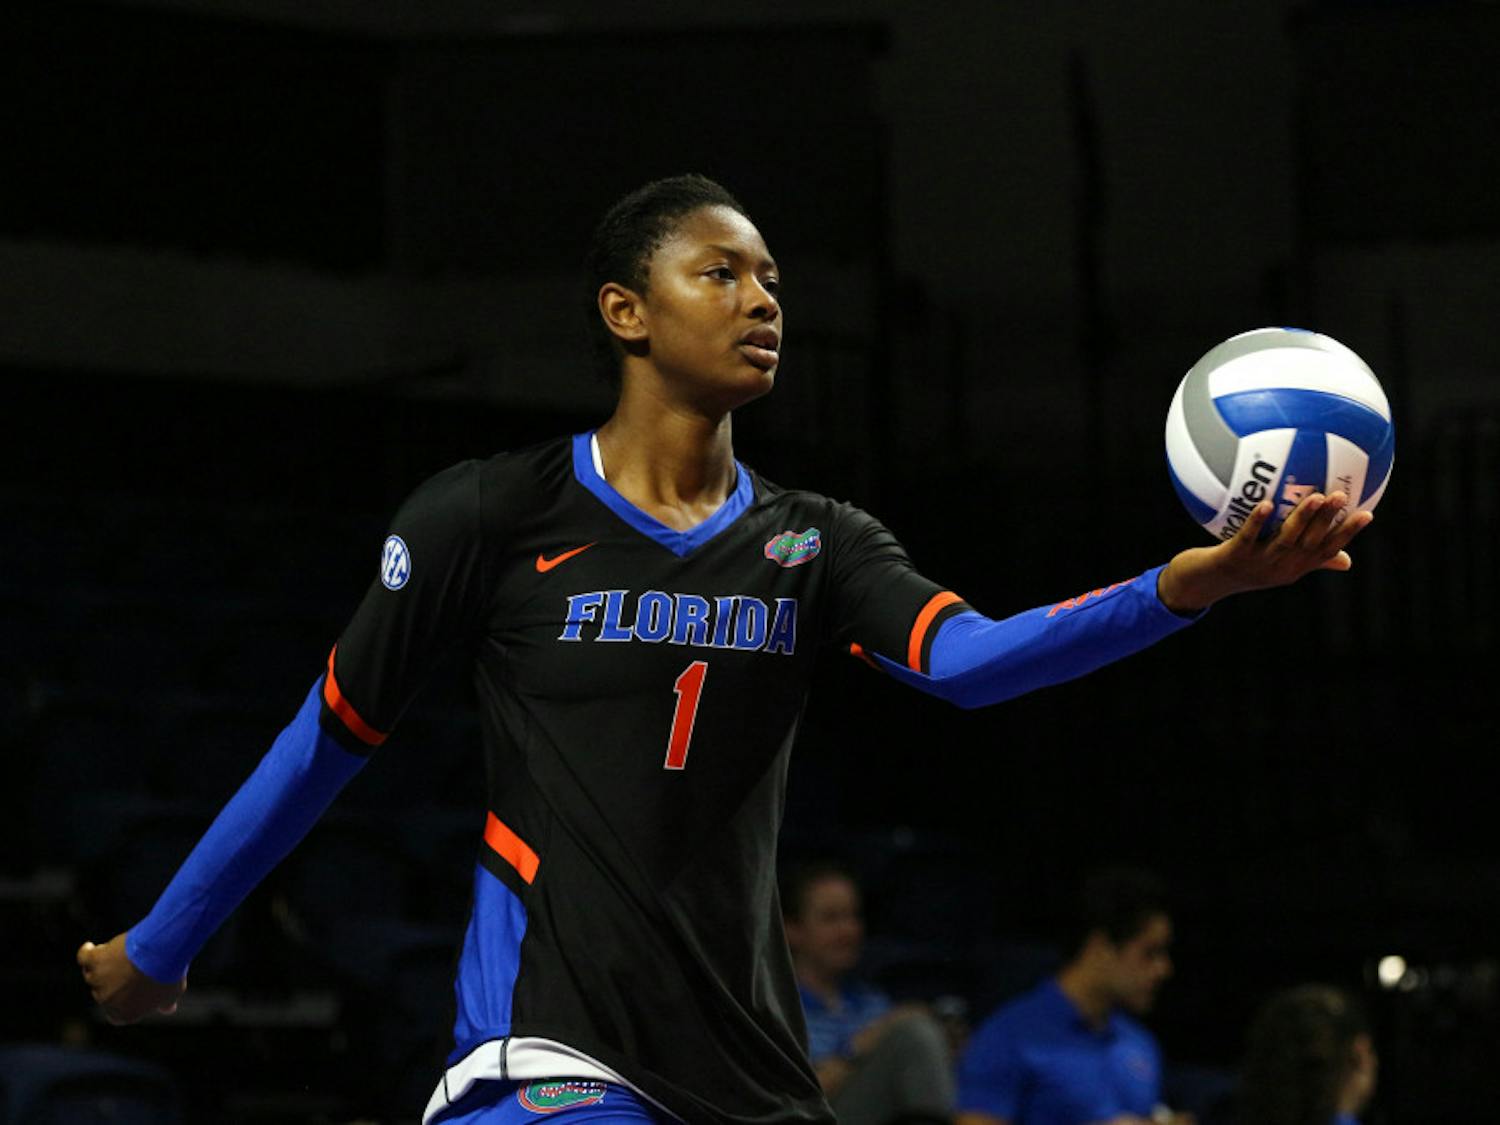 UF middle blocker Rhamat Alhassan holds the ball during Florida's 3-0 win against Florida A&amp;M on Friday at the O'Connell Center.